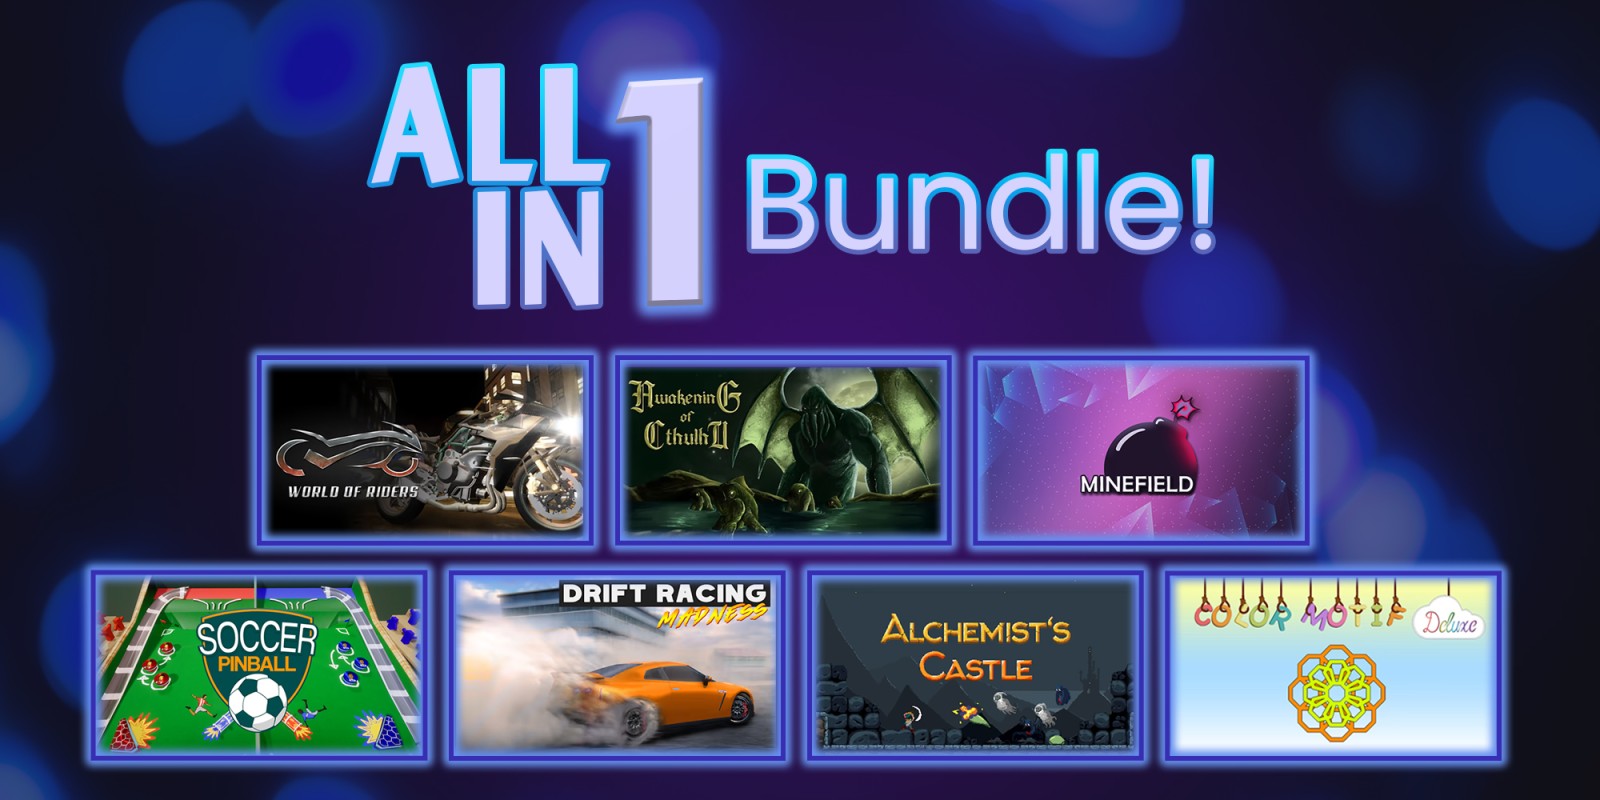 All in! Bundle